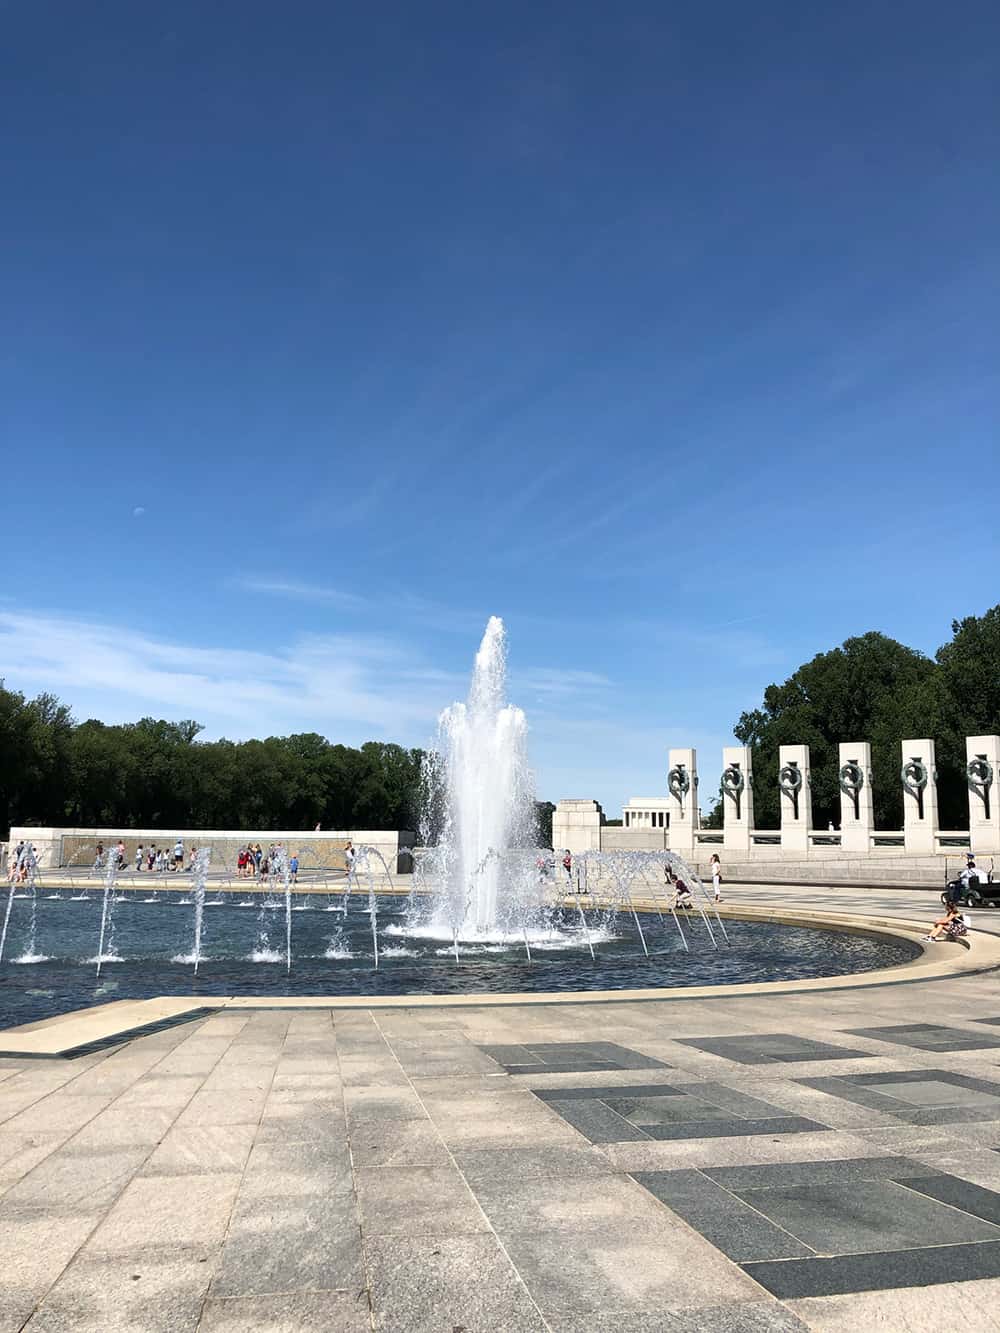 The World War 2 memorial in Washington DC| where we have visited in DC + our DC bucket list for the future | via Autumn All Along